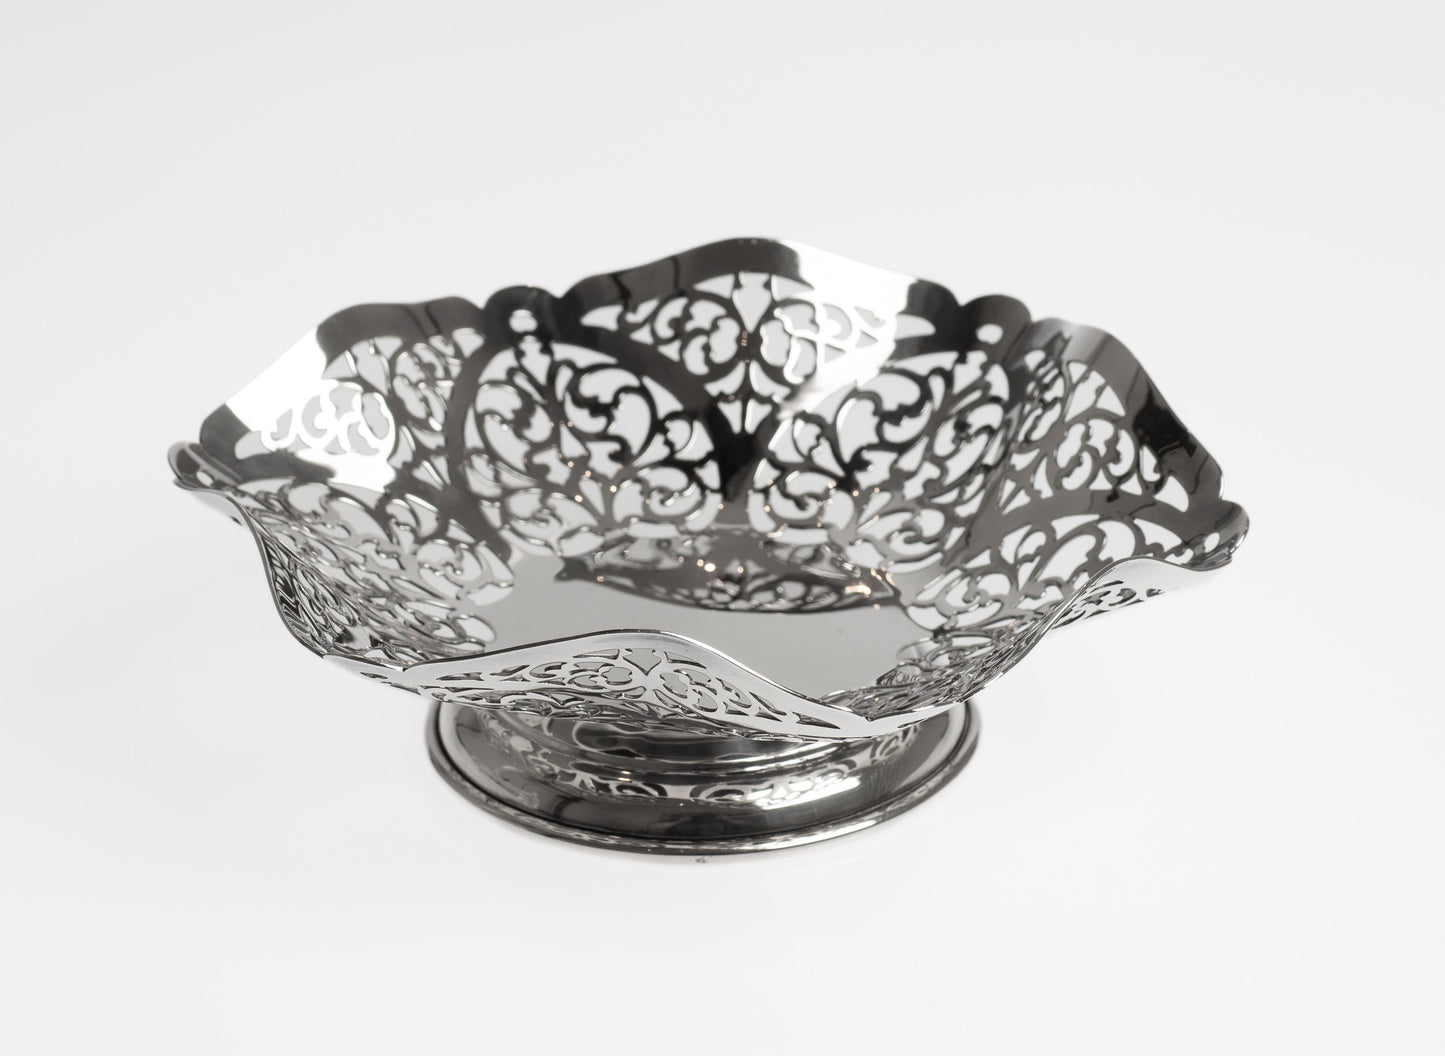 Vintage Silver Sweetmeat Dish with Pierced Sides - SJ Rose London 1974 (Code 2323)